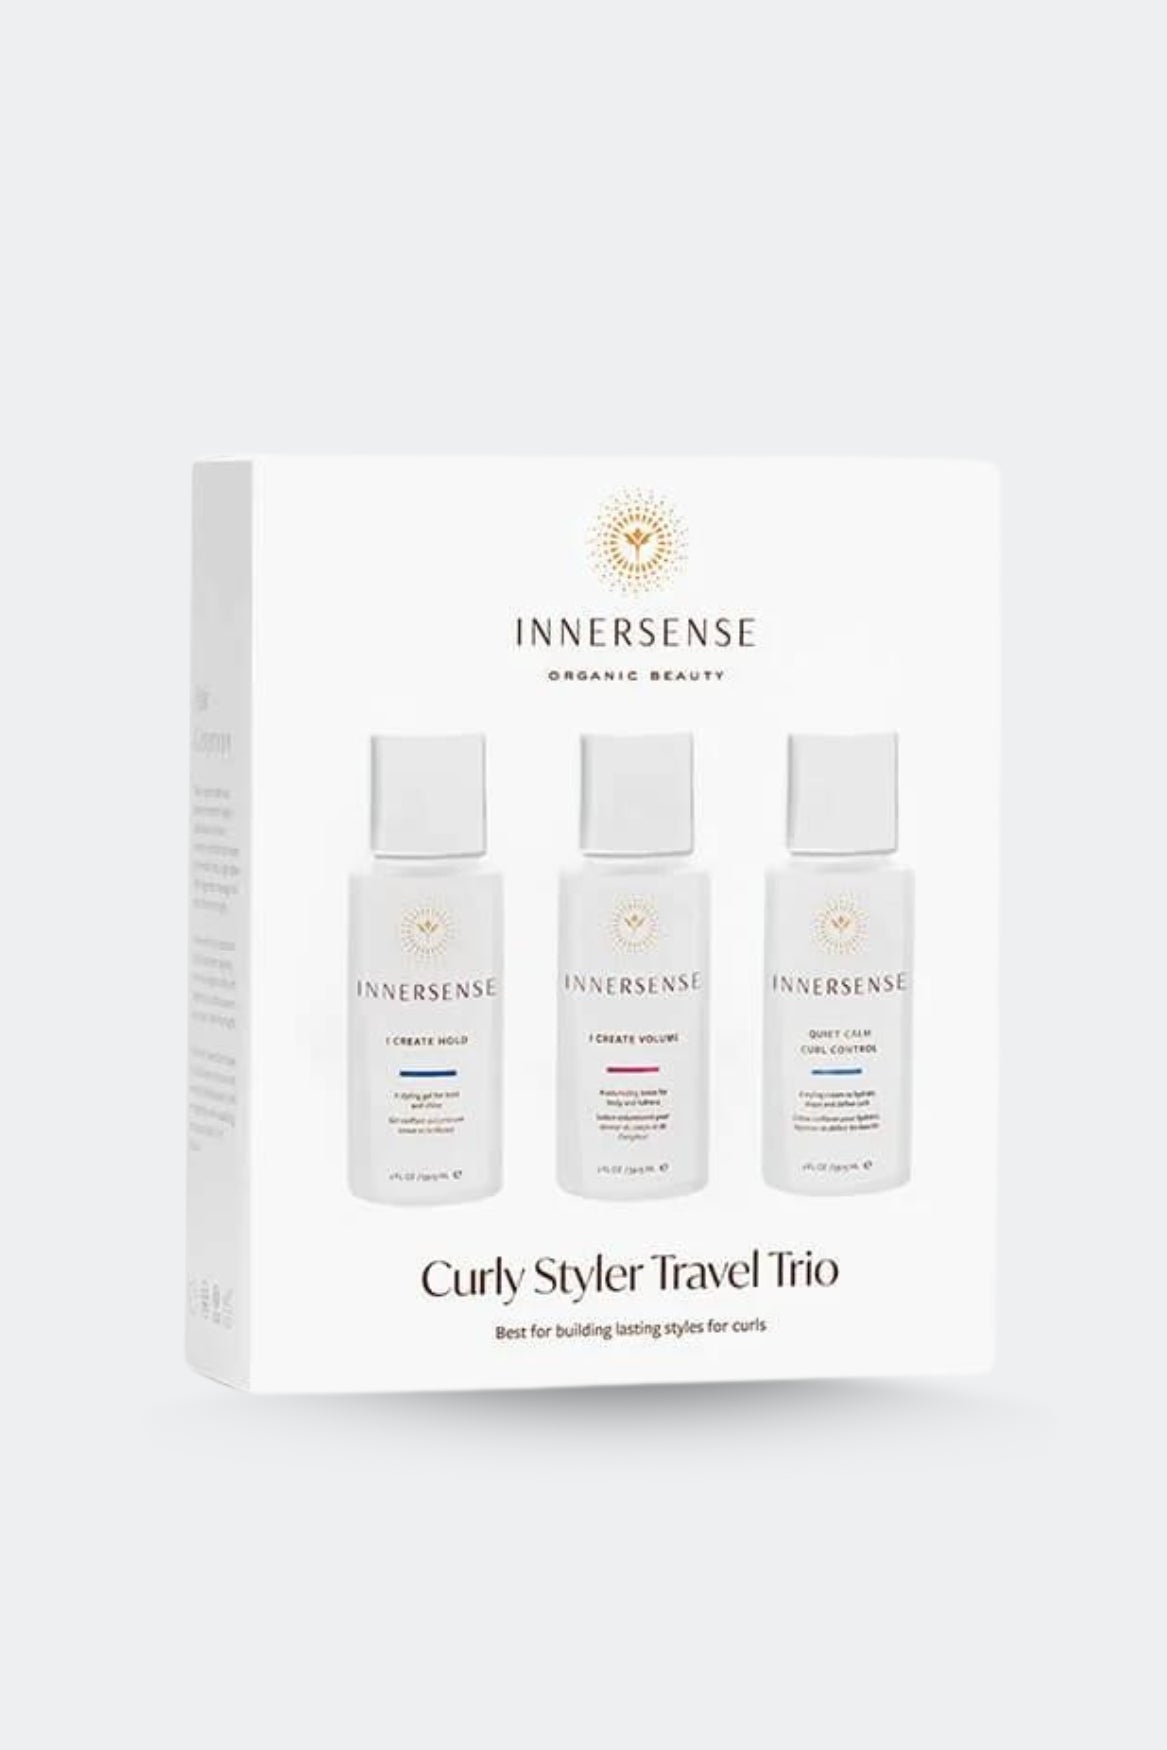 Innersense - Travel Trio (Curly Styler Collection) - 3 x 59ml